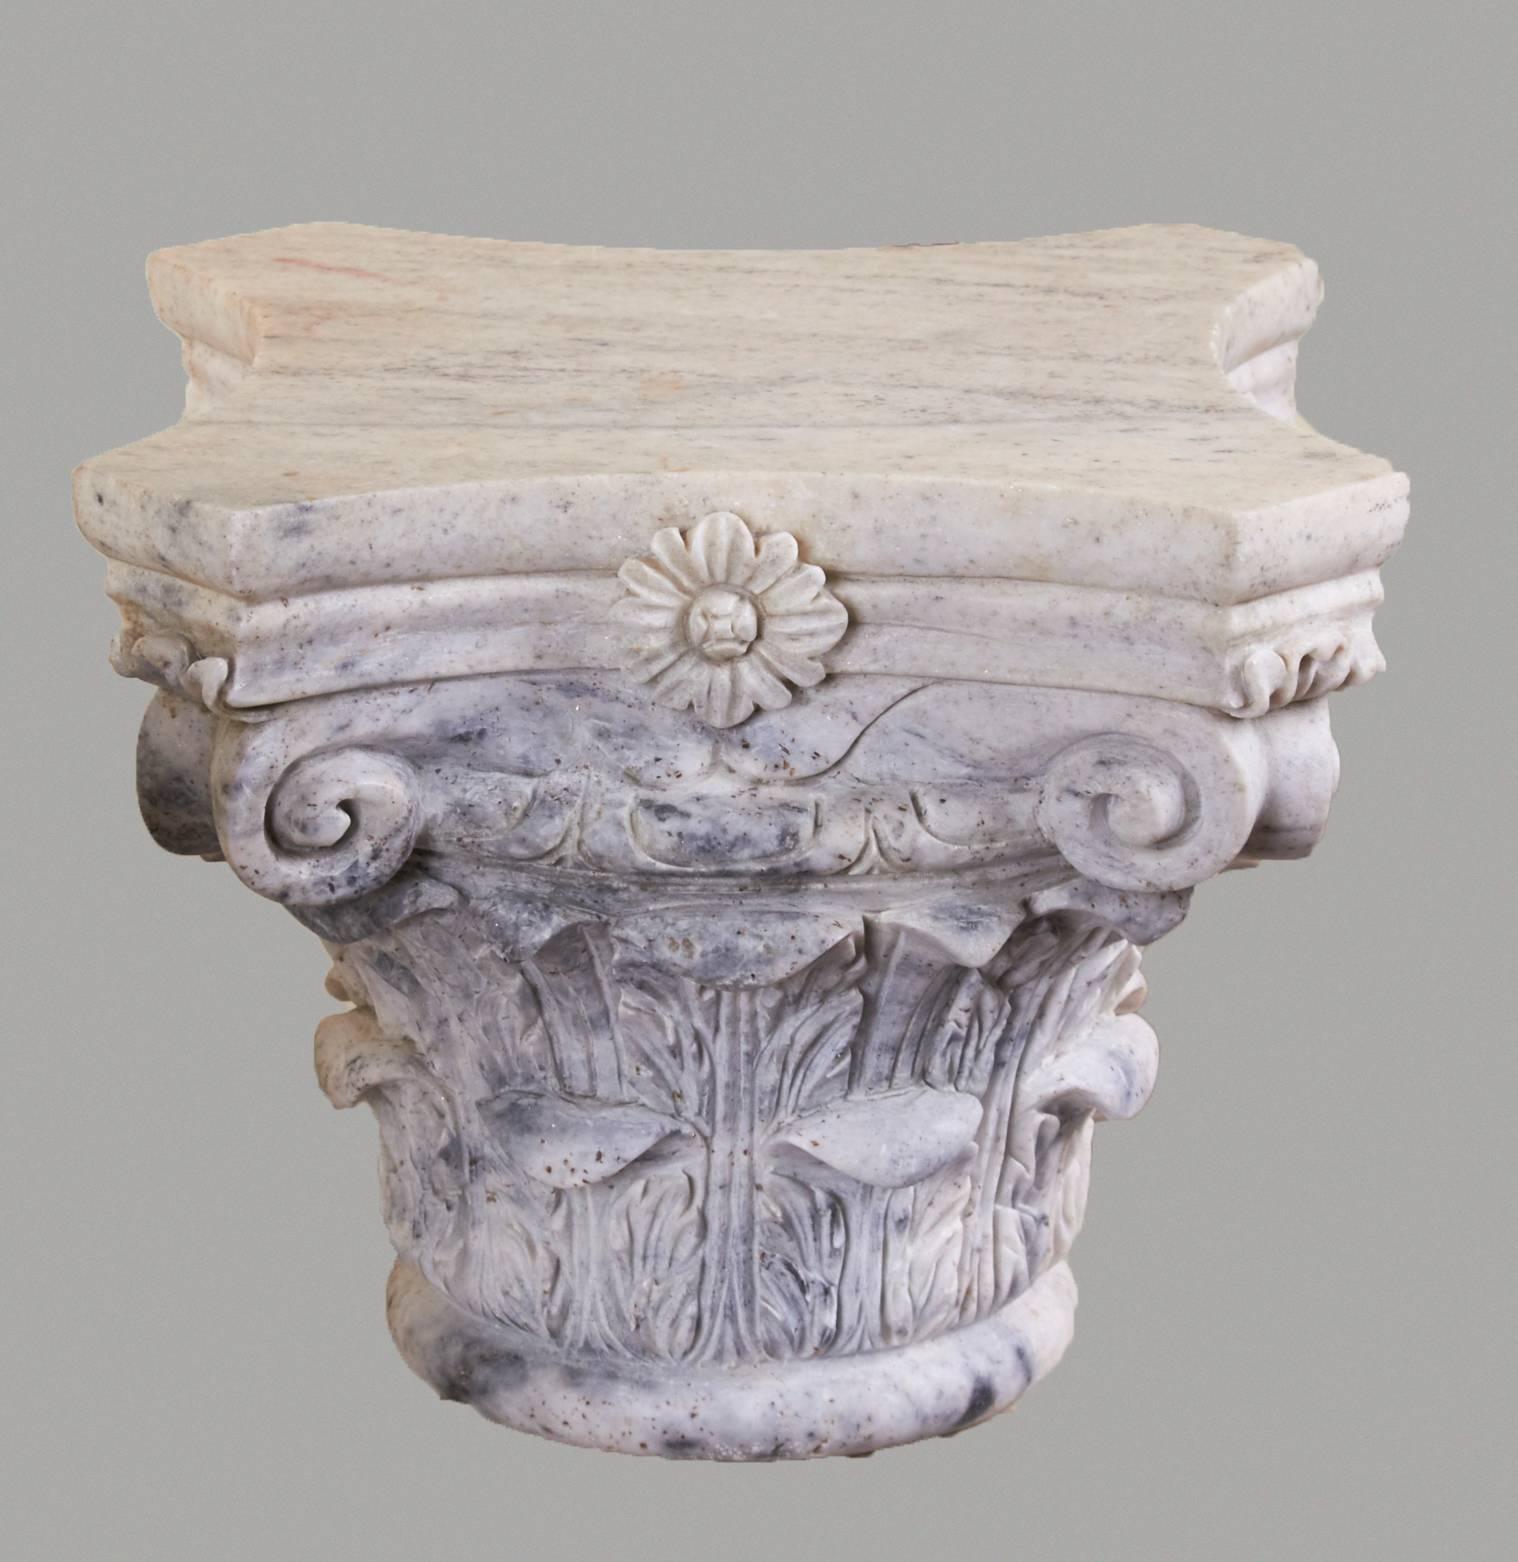 A pair of Italian Carrara marble Corinthian capitals of typical form with floral and scroll decoration. Weathered patination. Probably 20th century. Heavy.